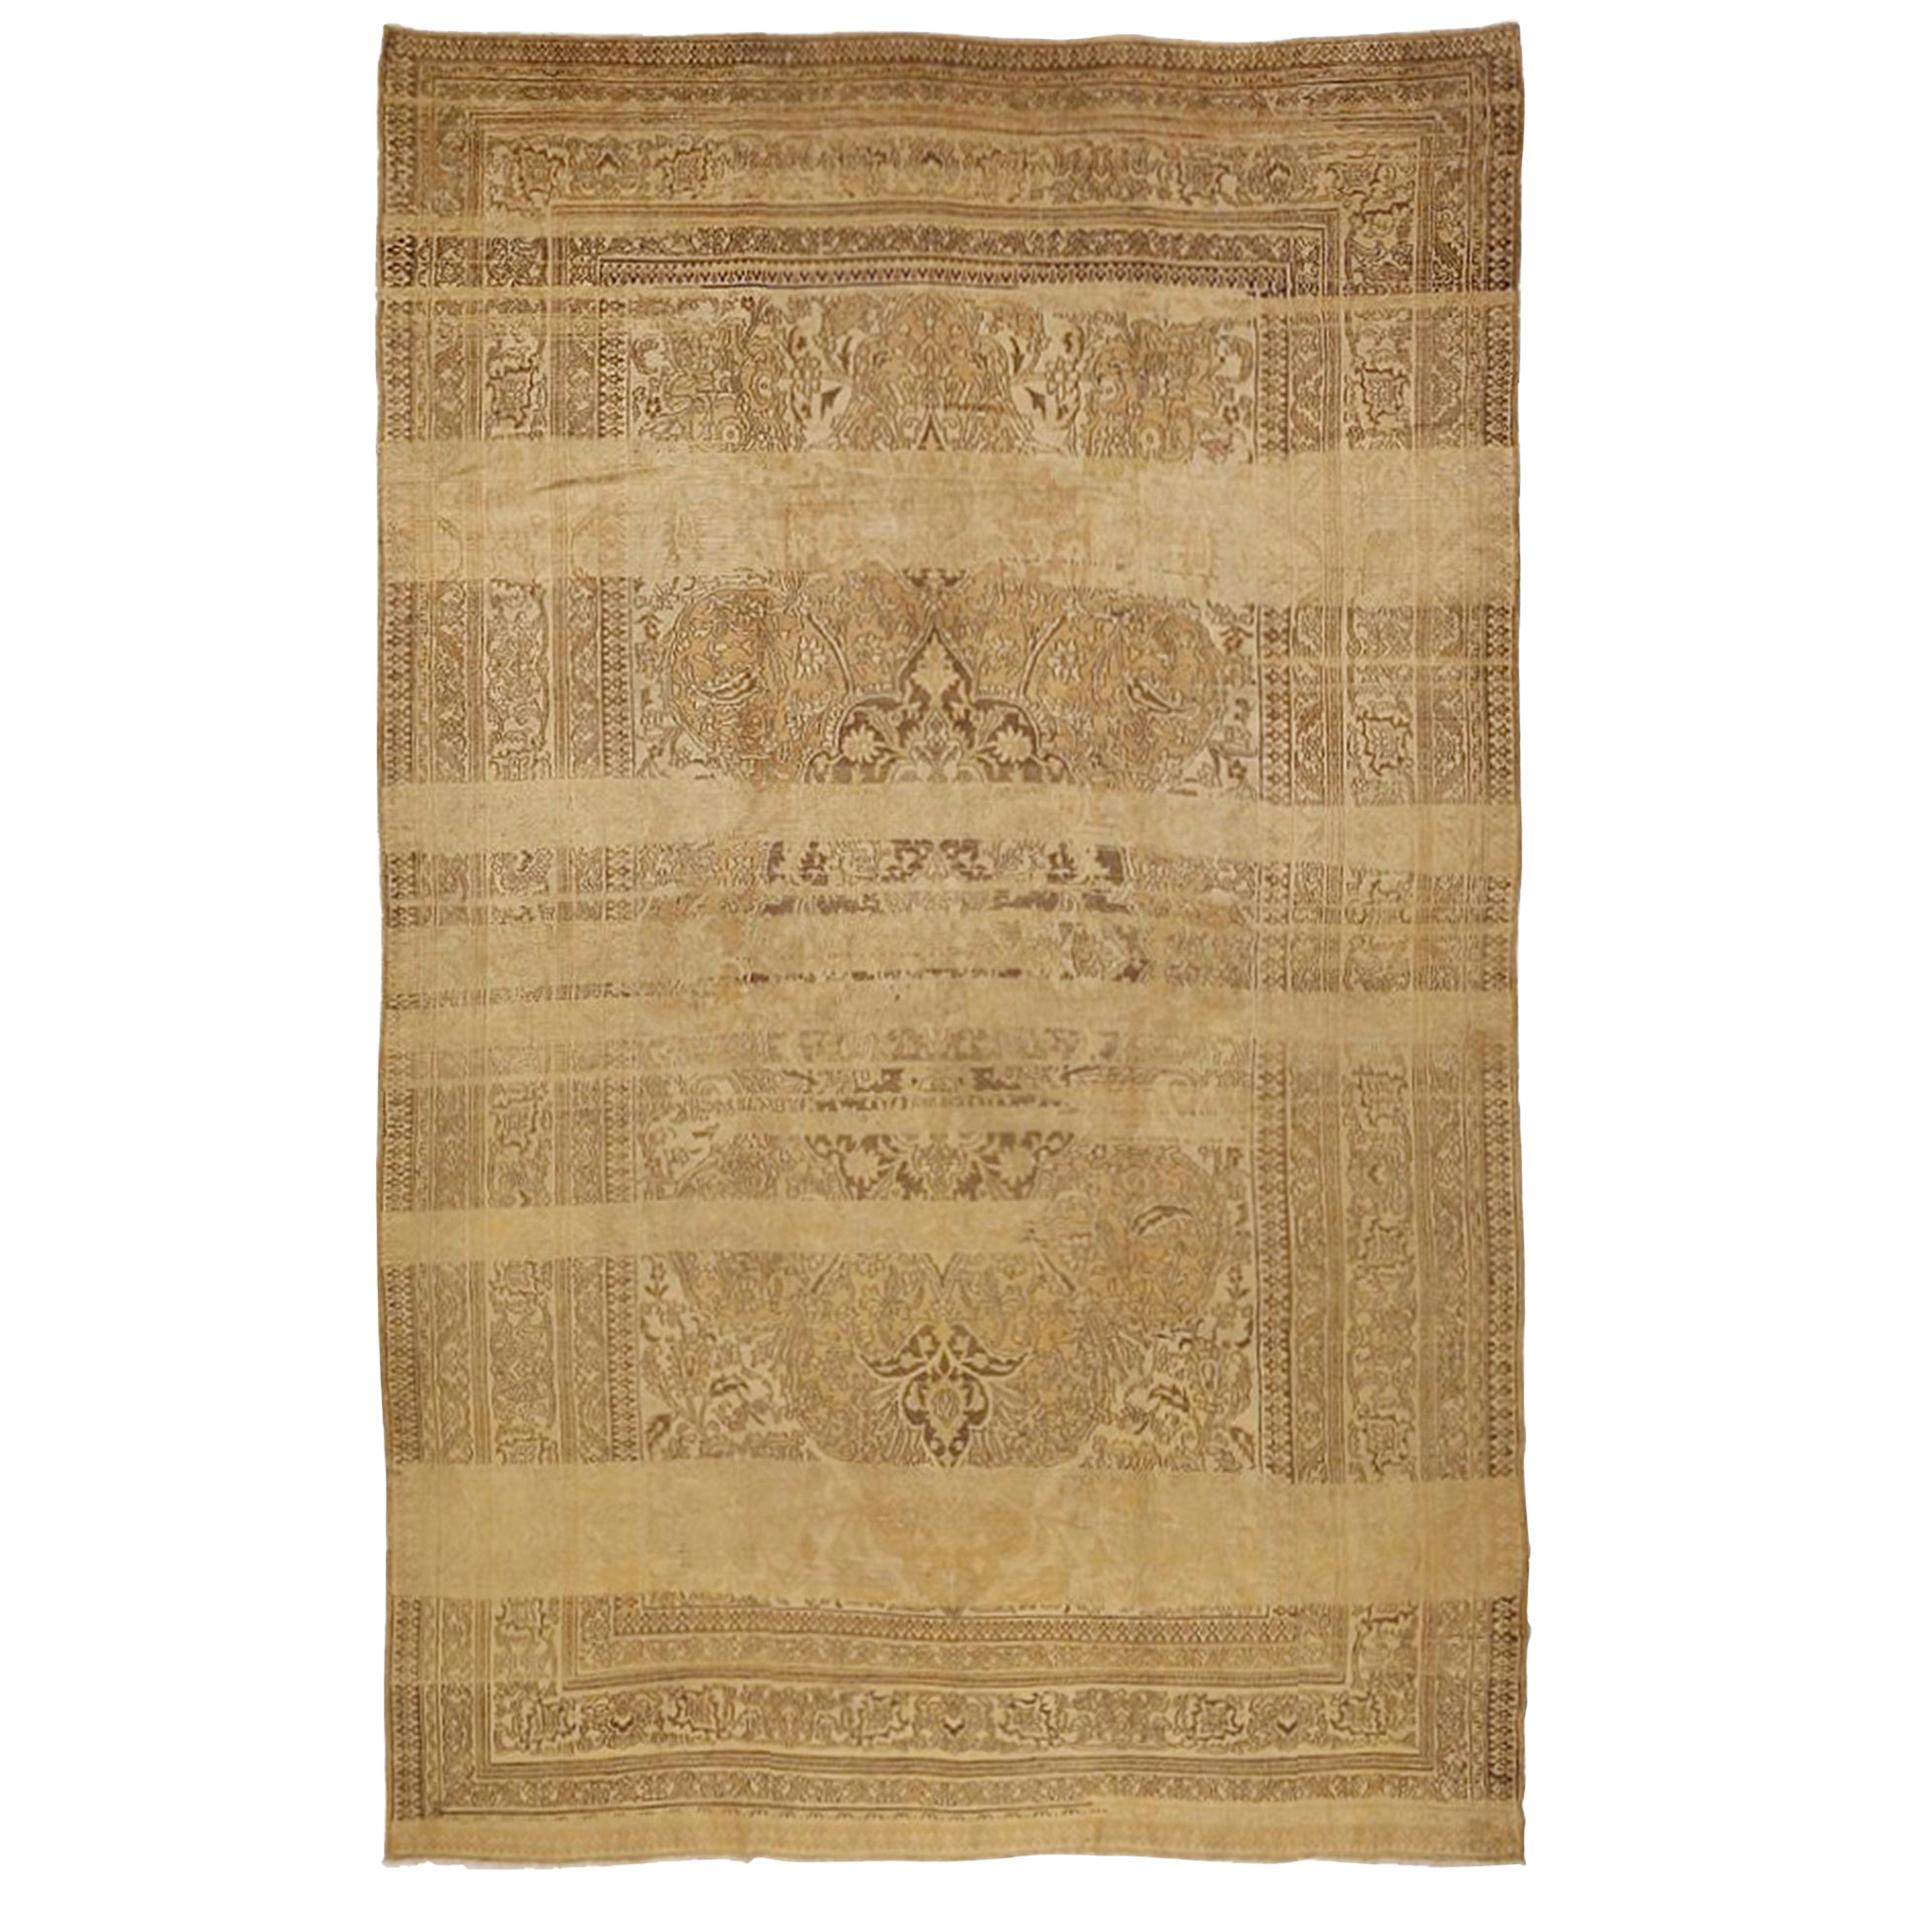 Antique Persian Doroksh Rug with Brown and Beige Floral Patterns For Sale